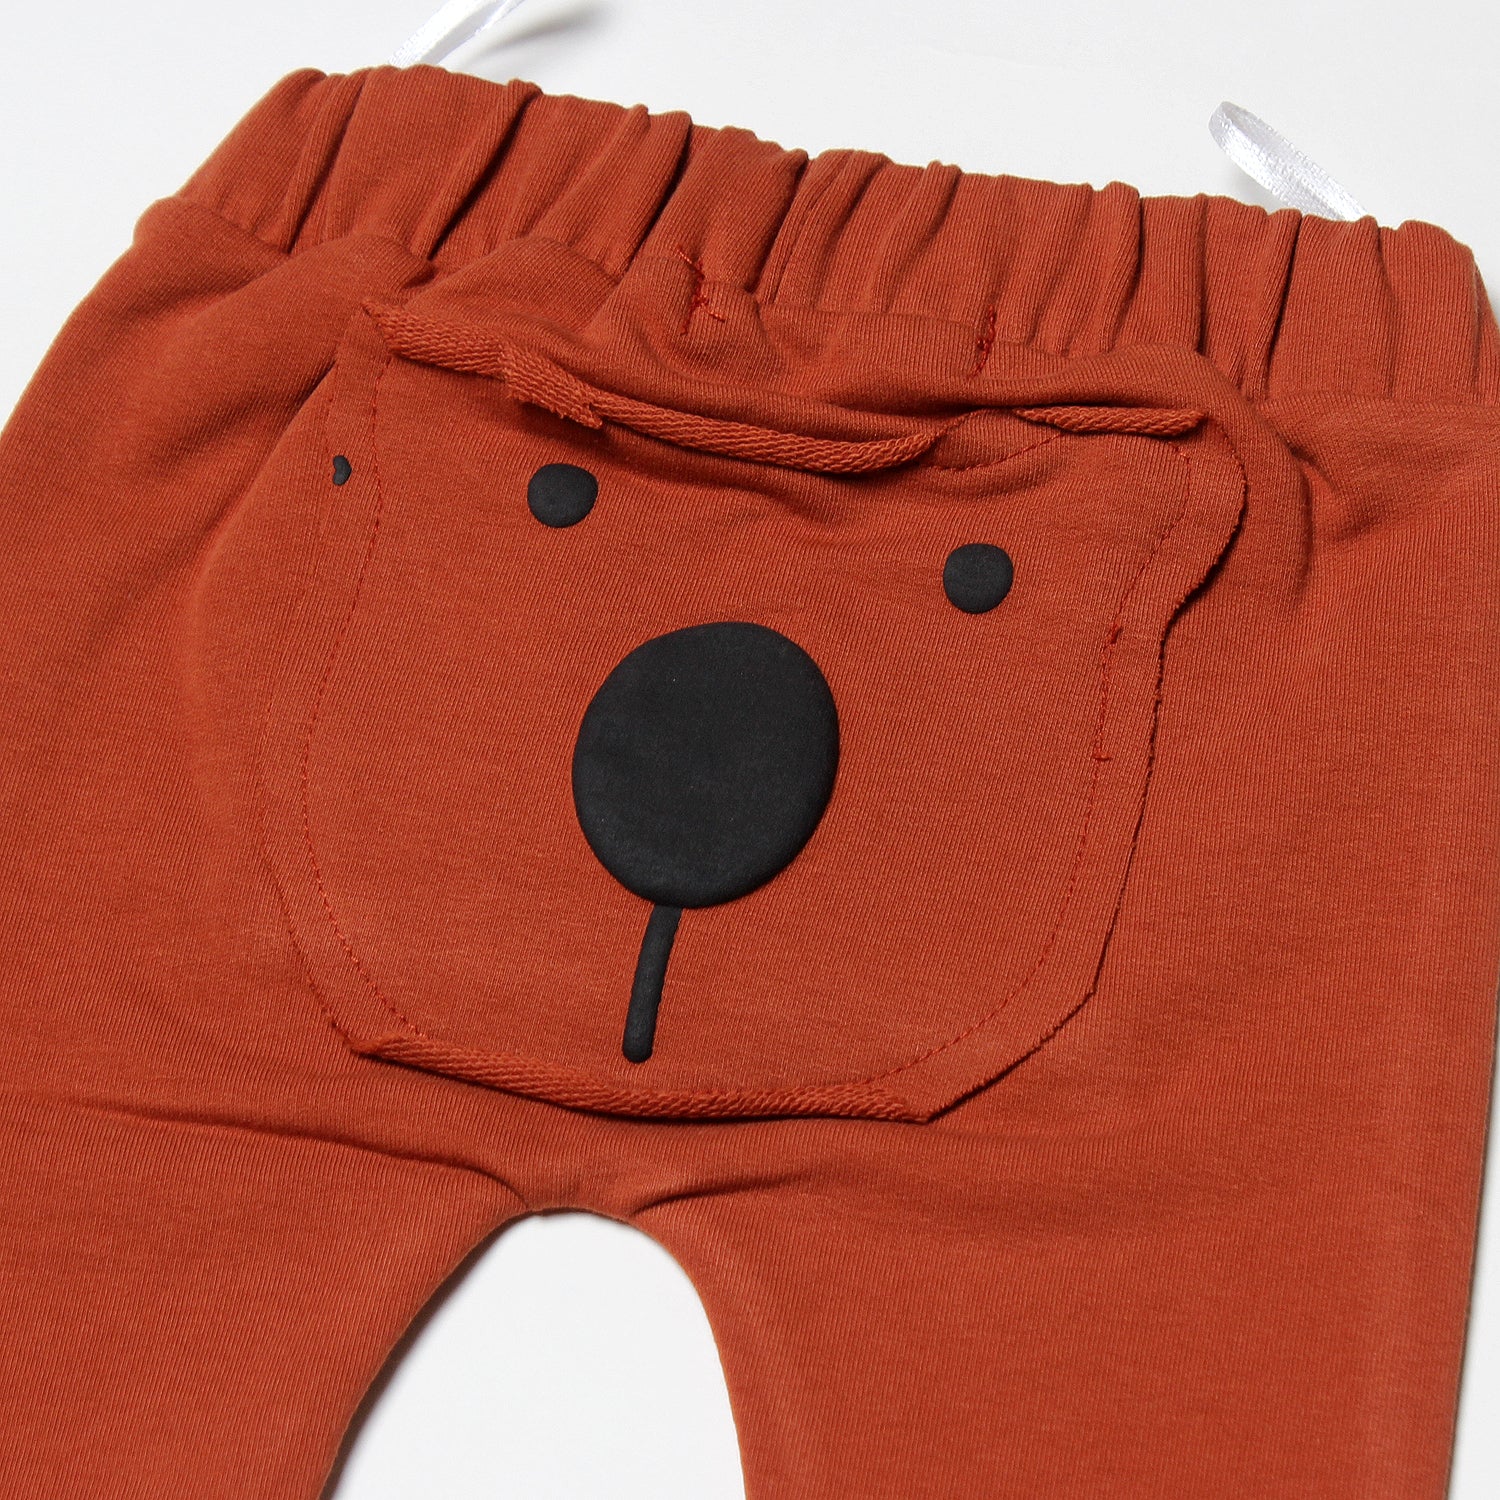 NEW BROWN BEAR FACE PATCH WITH POCKETS TROUSER